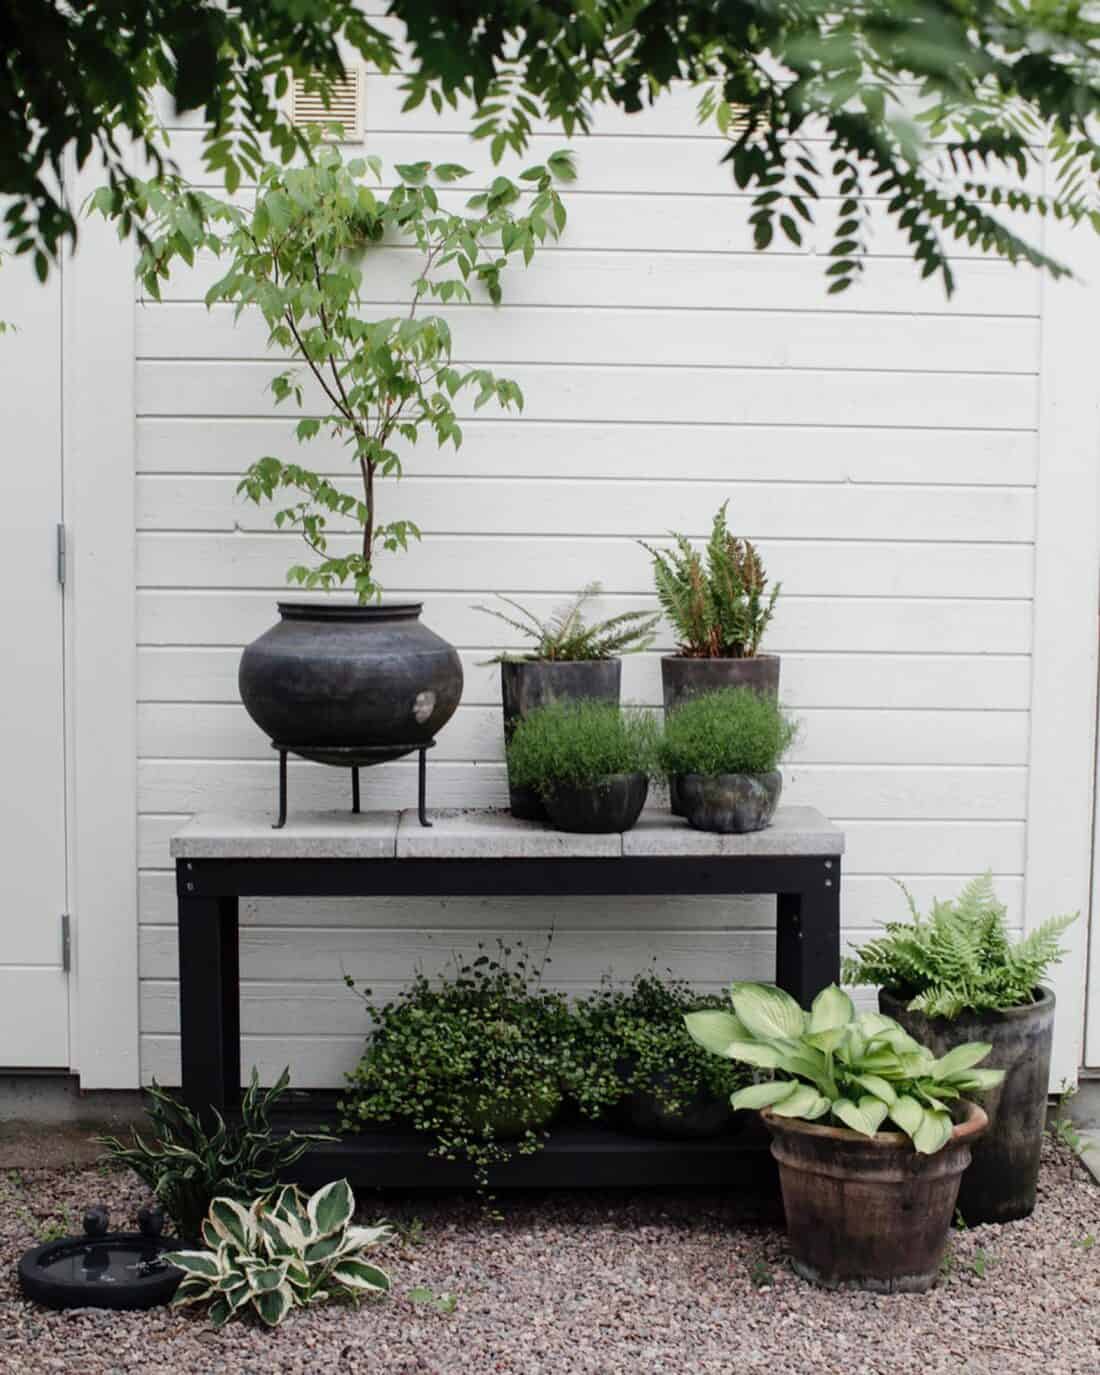 A modern outdoor setup featuring a variety of potted plants on a black bench against a white wooden wall.